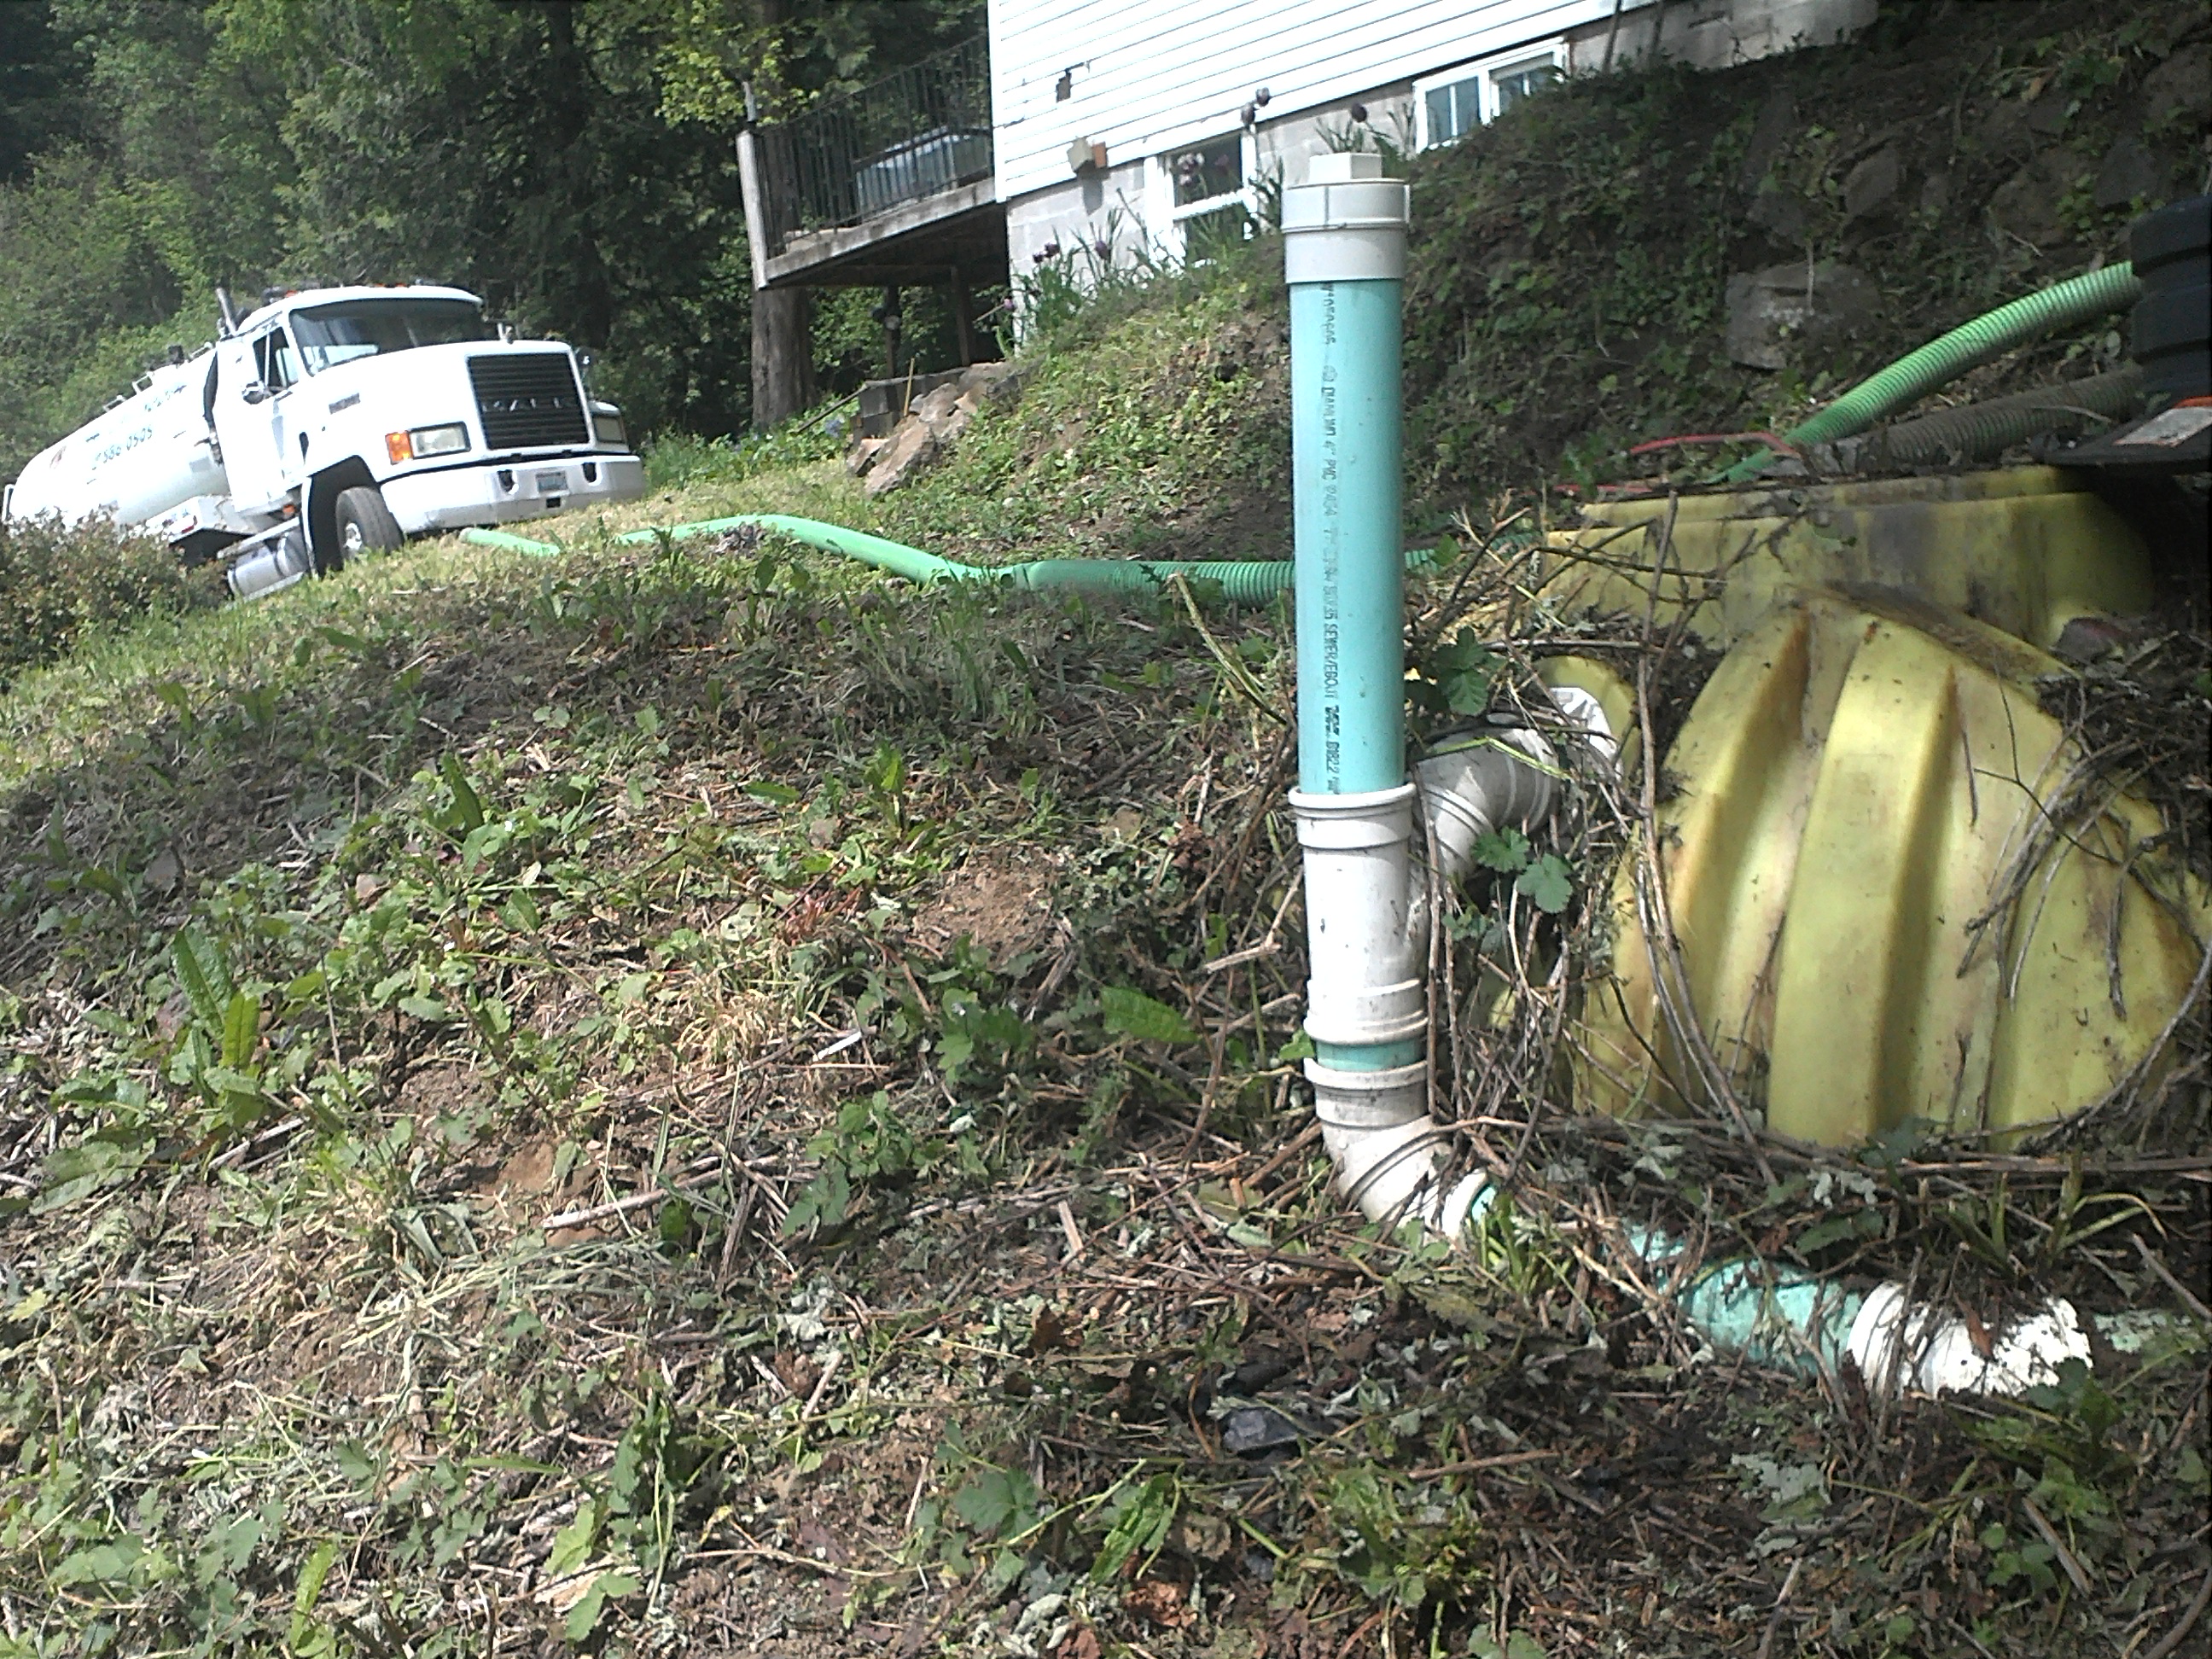 The Importance of Having a Proper Working Septic System